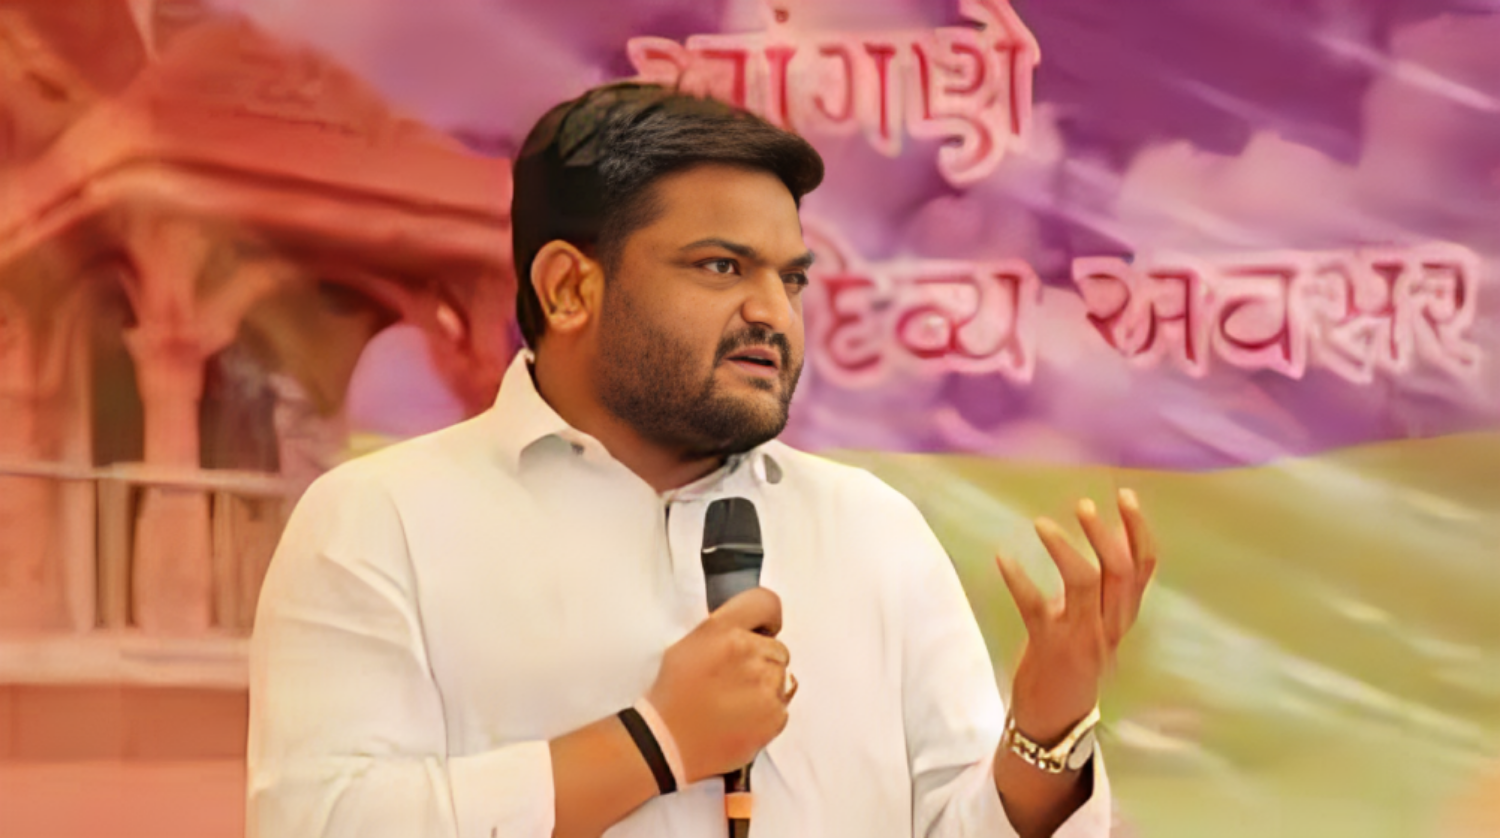 Picture of Surat: Surat court acquitted Hardik Patel in the case of giving a fiery speech in a rally in Sarthana, see video